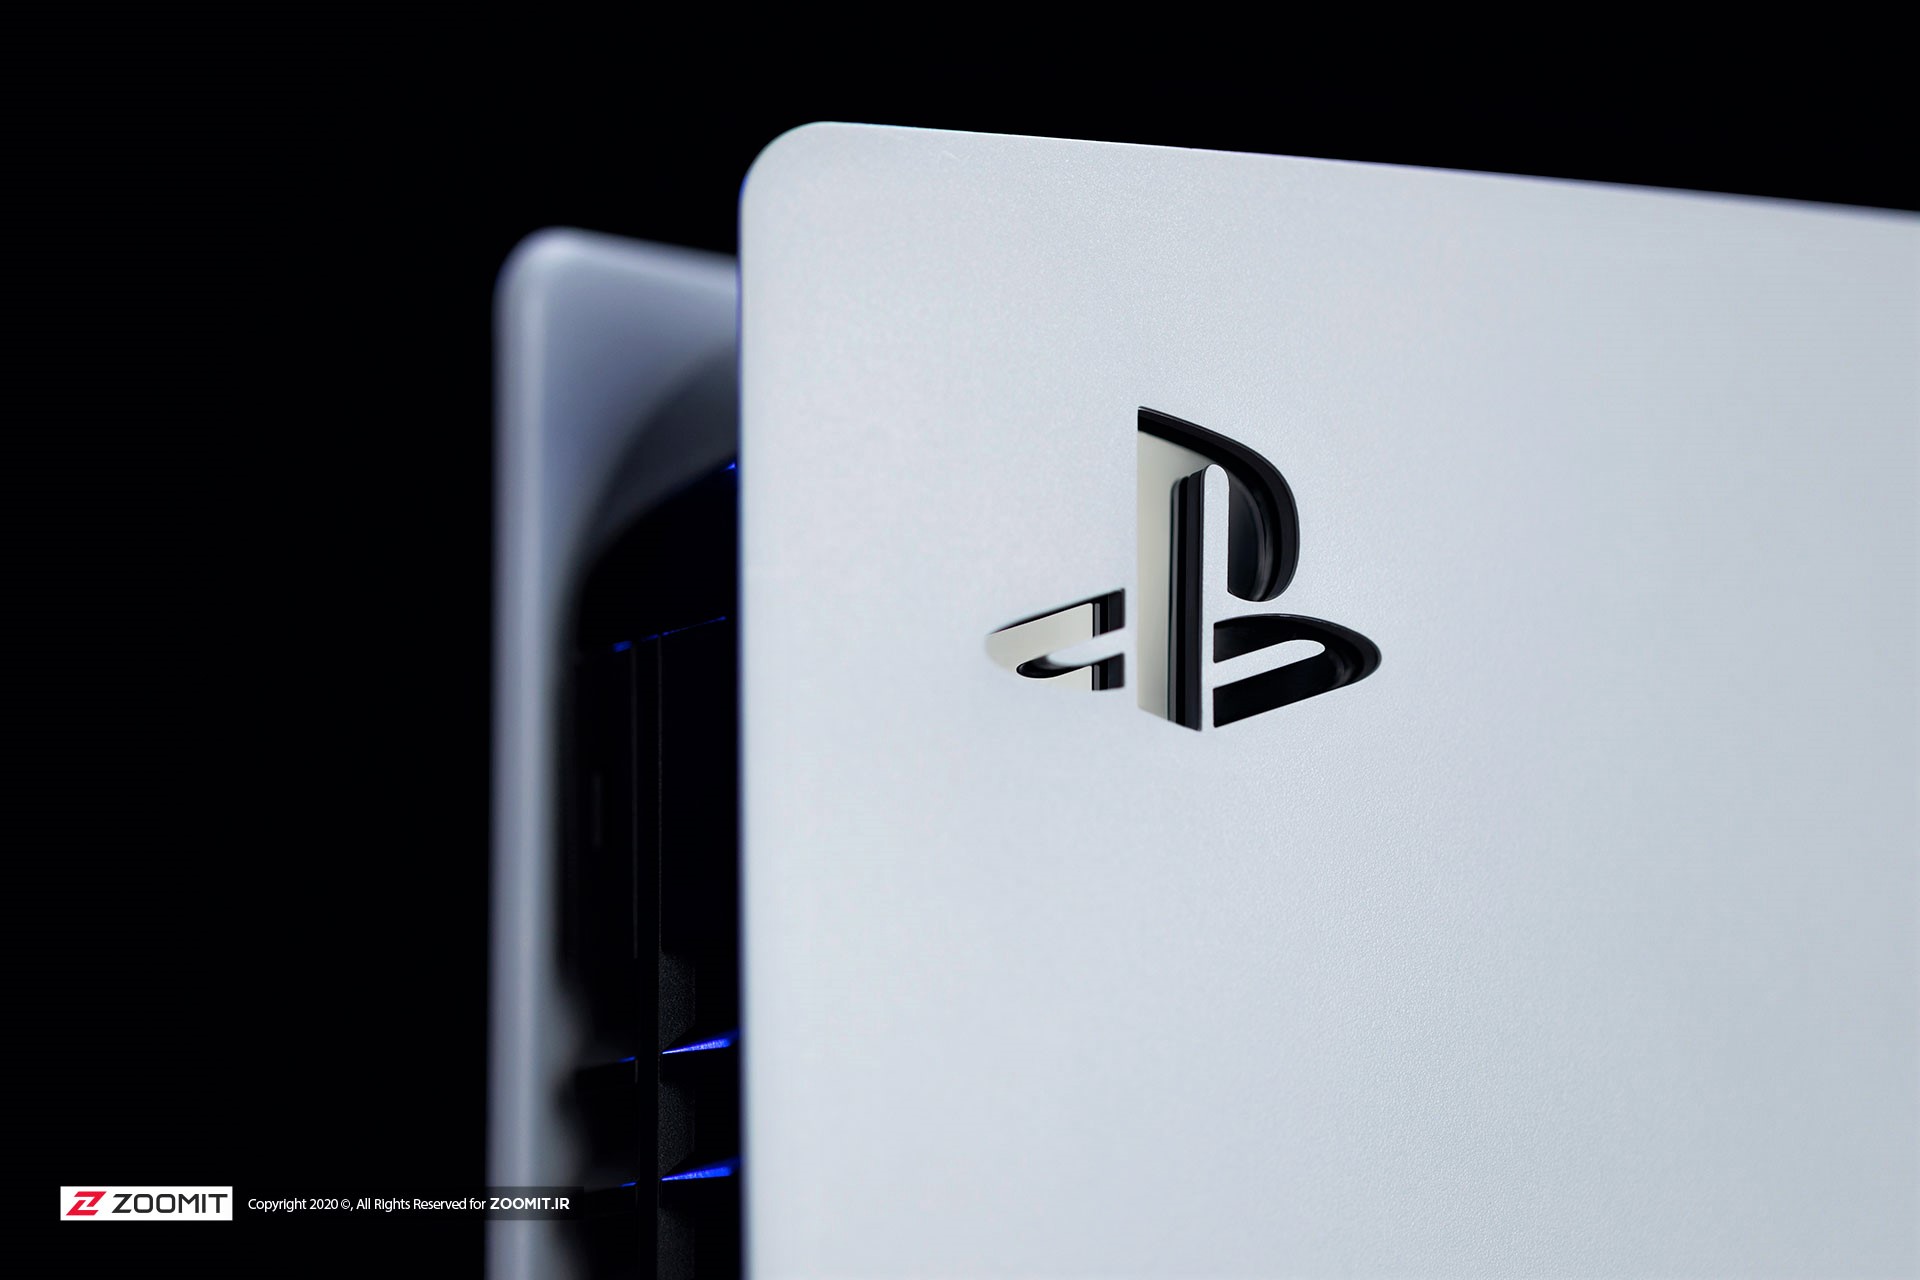 2020 12 white playstation 5 glossy logo with blue highlights on its side 638c64e4a77666af5aef0d14